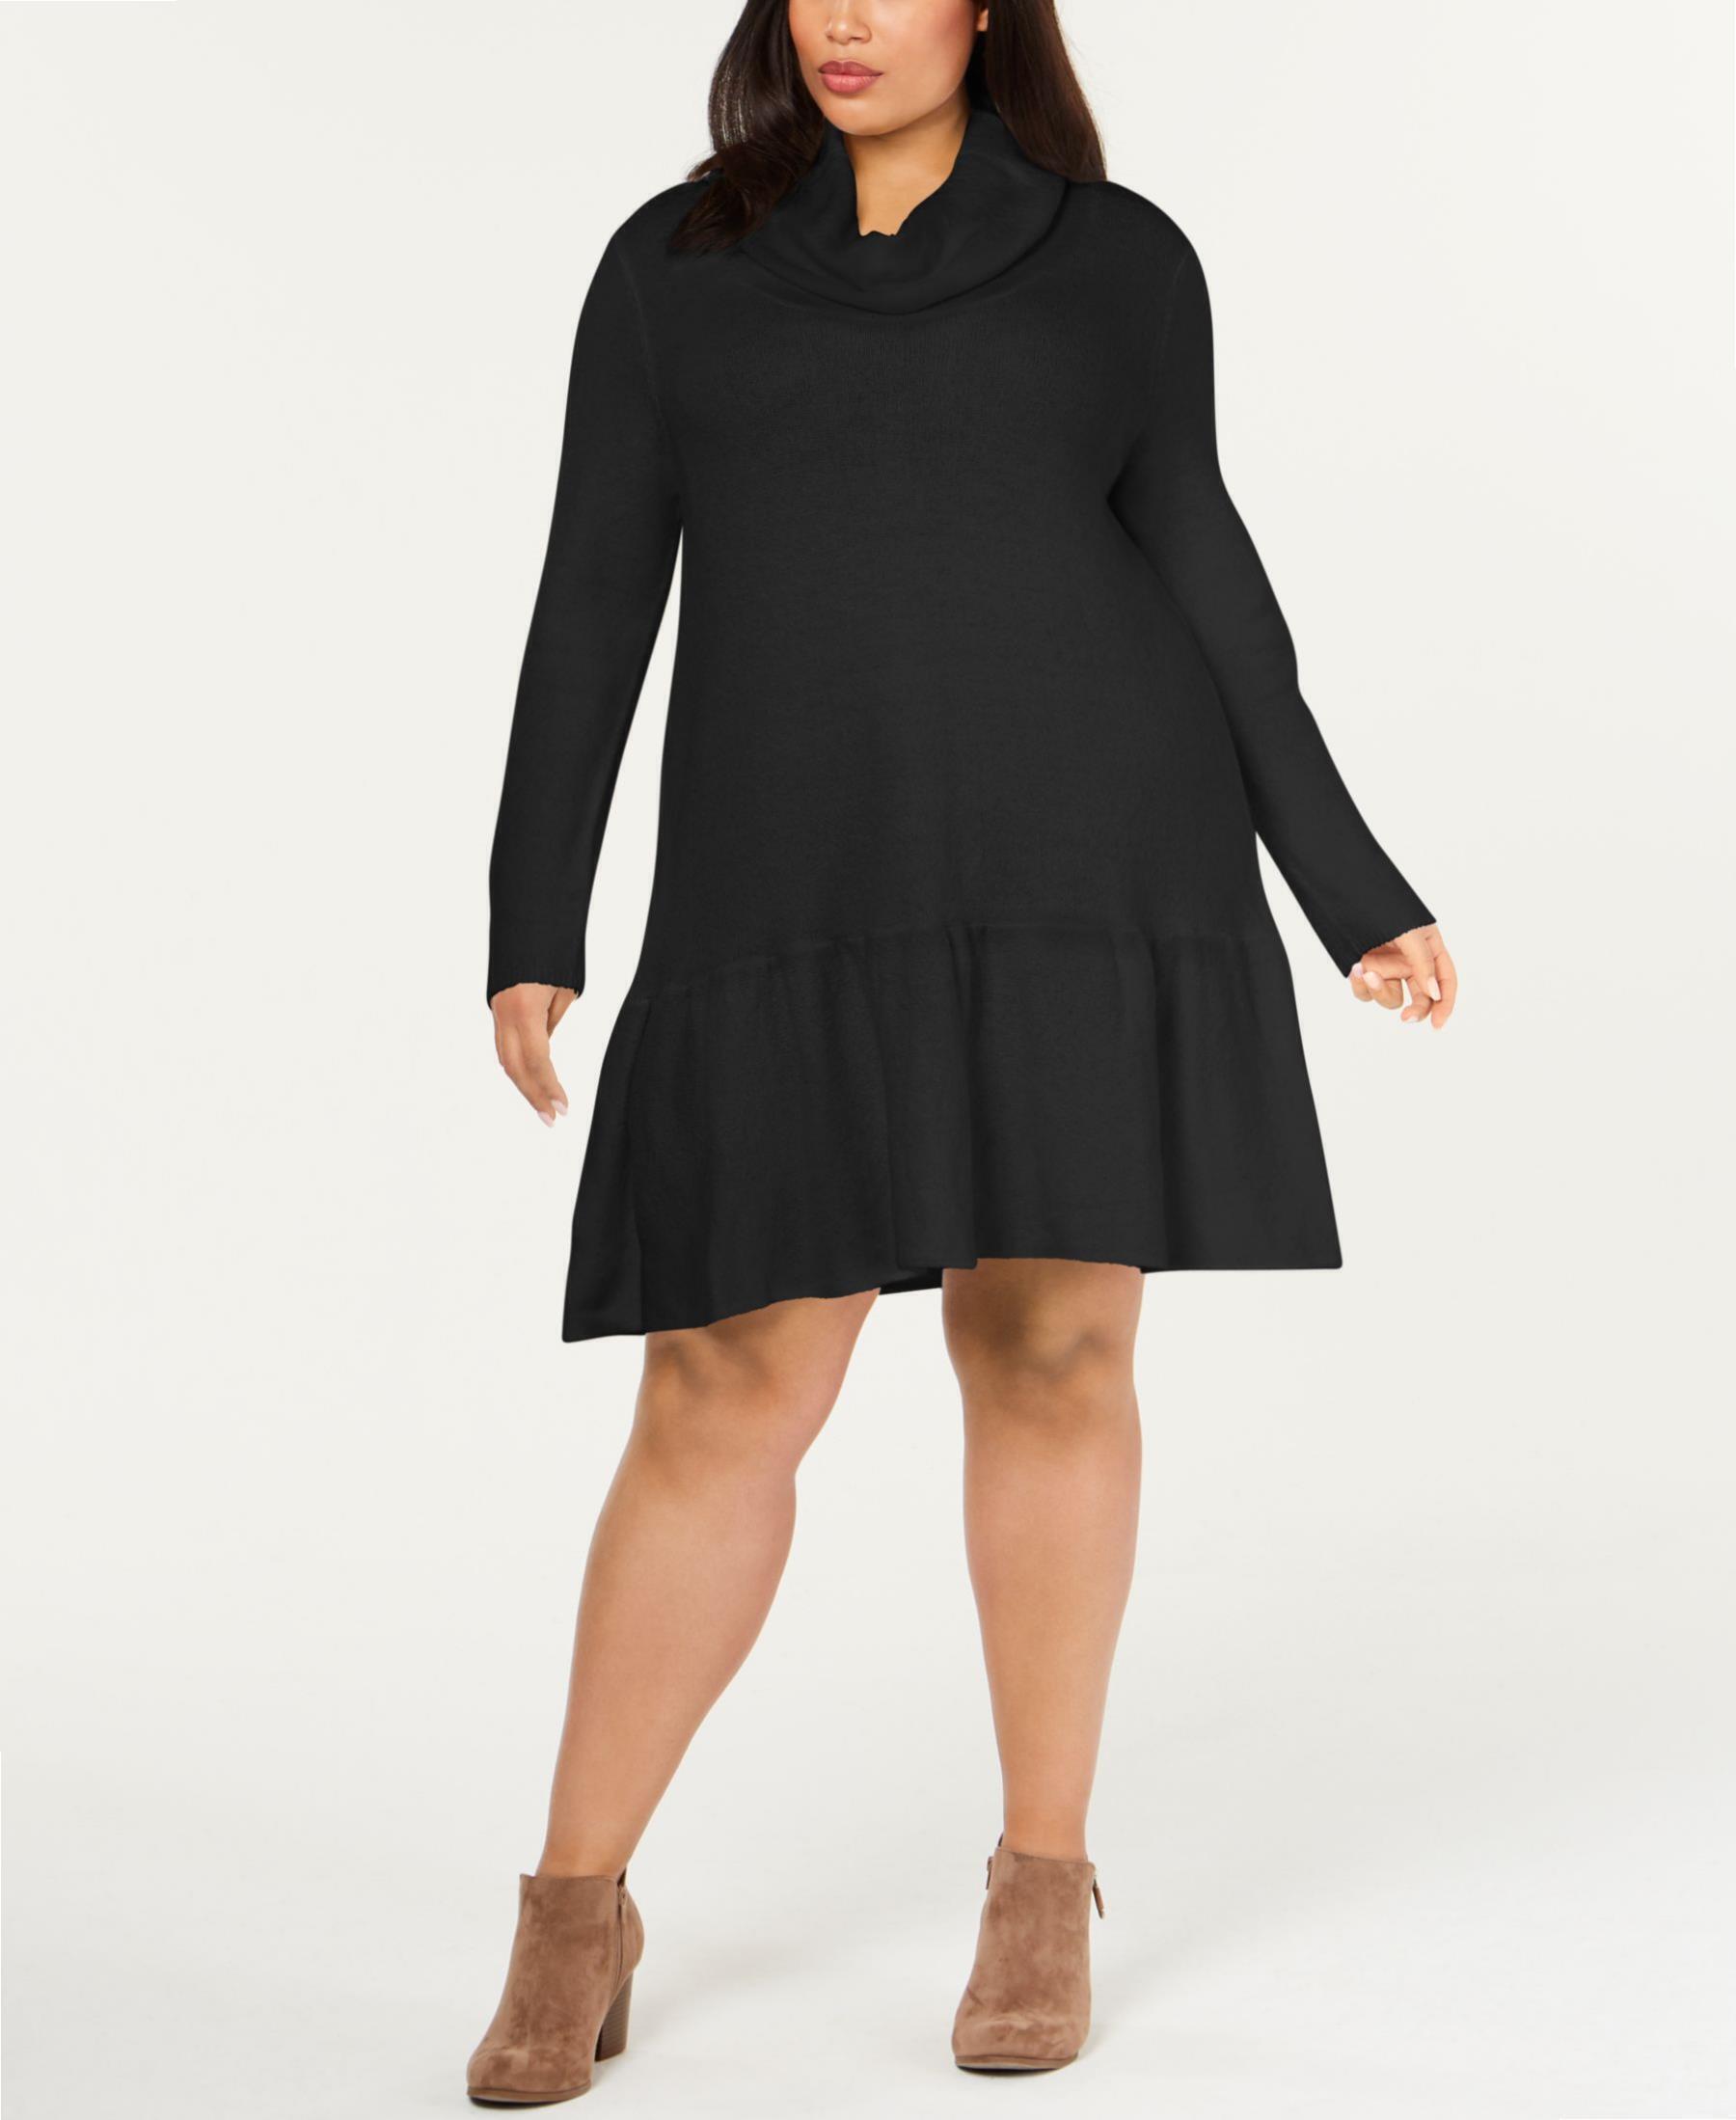 NY Collection Plus Size 1X Black Sweaterdress Dress | Canerra